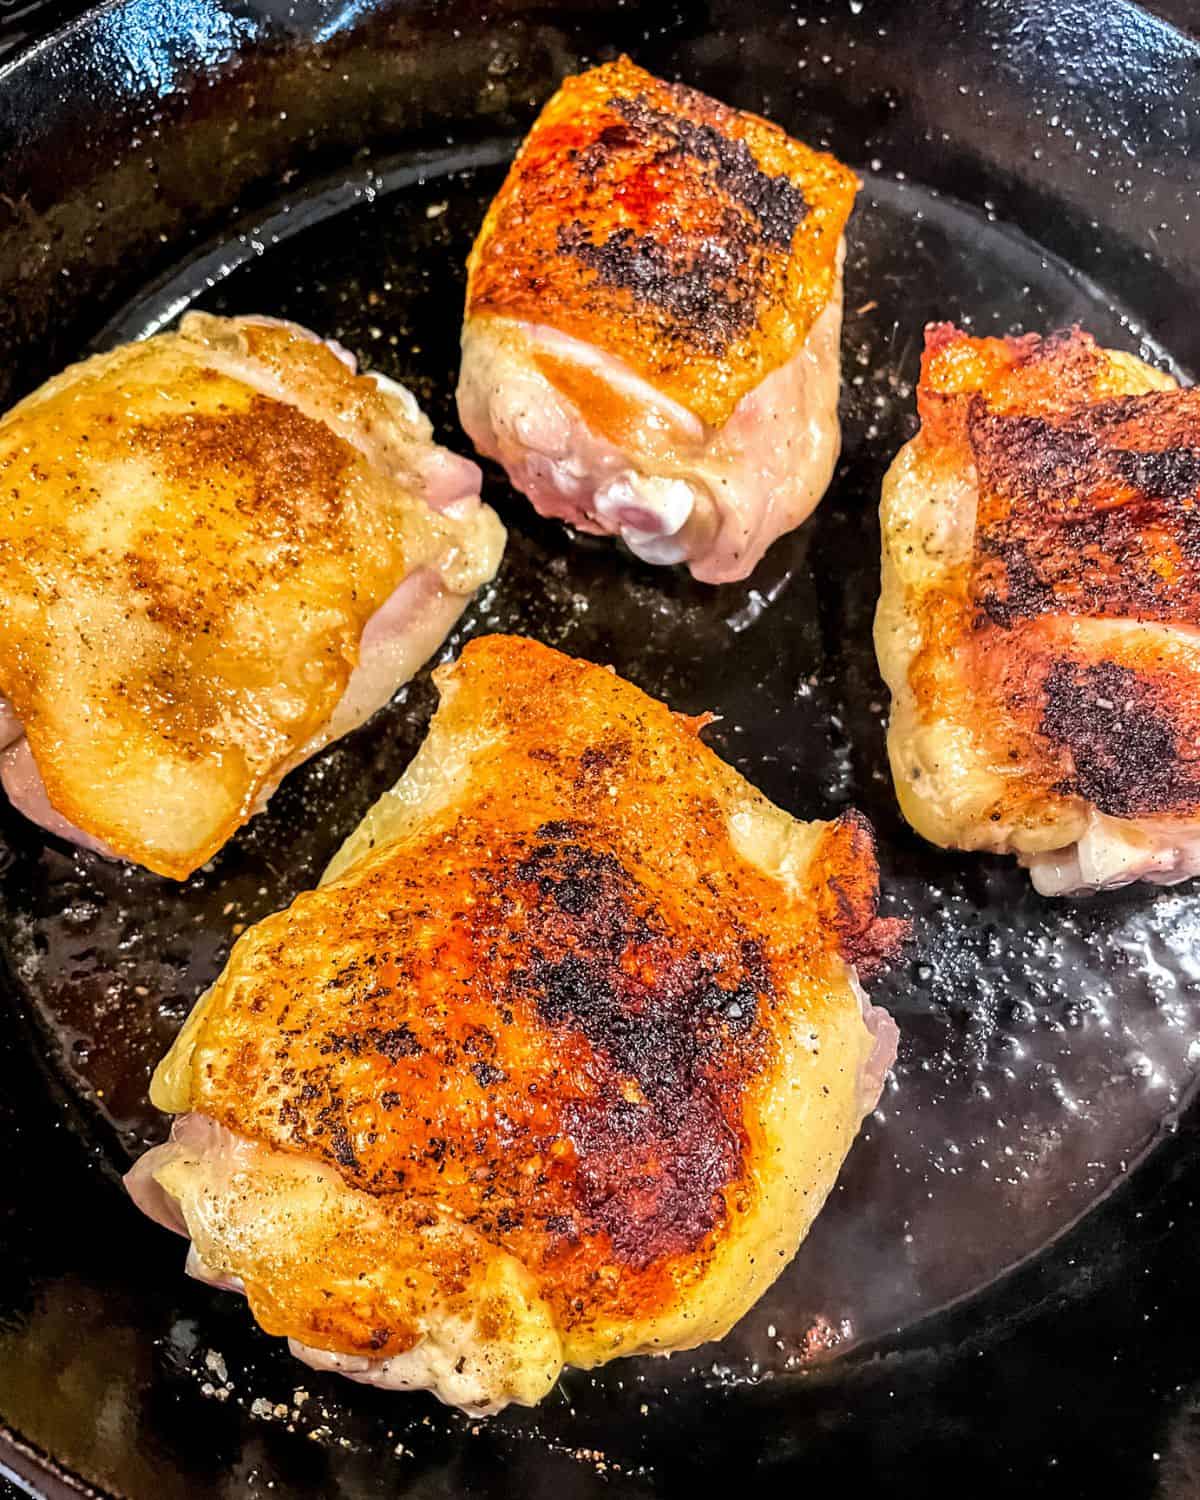 Seared chicken thighs in a skillet.